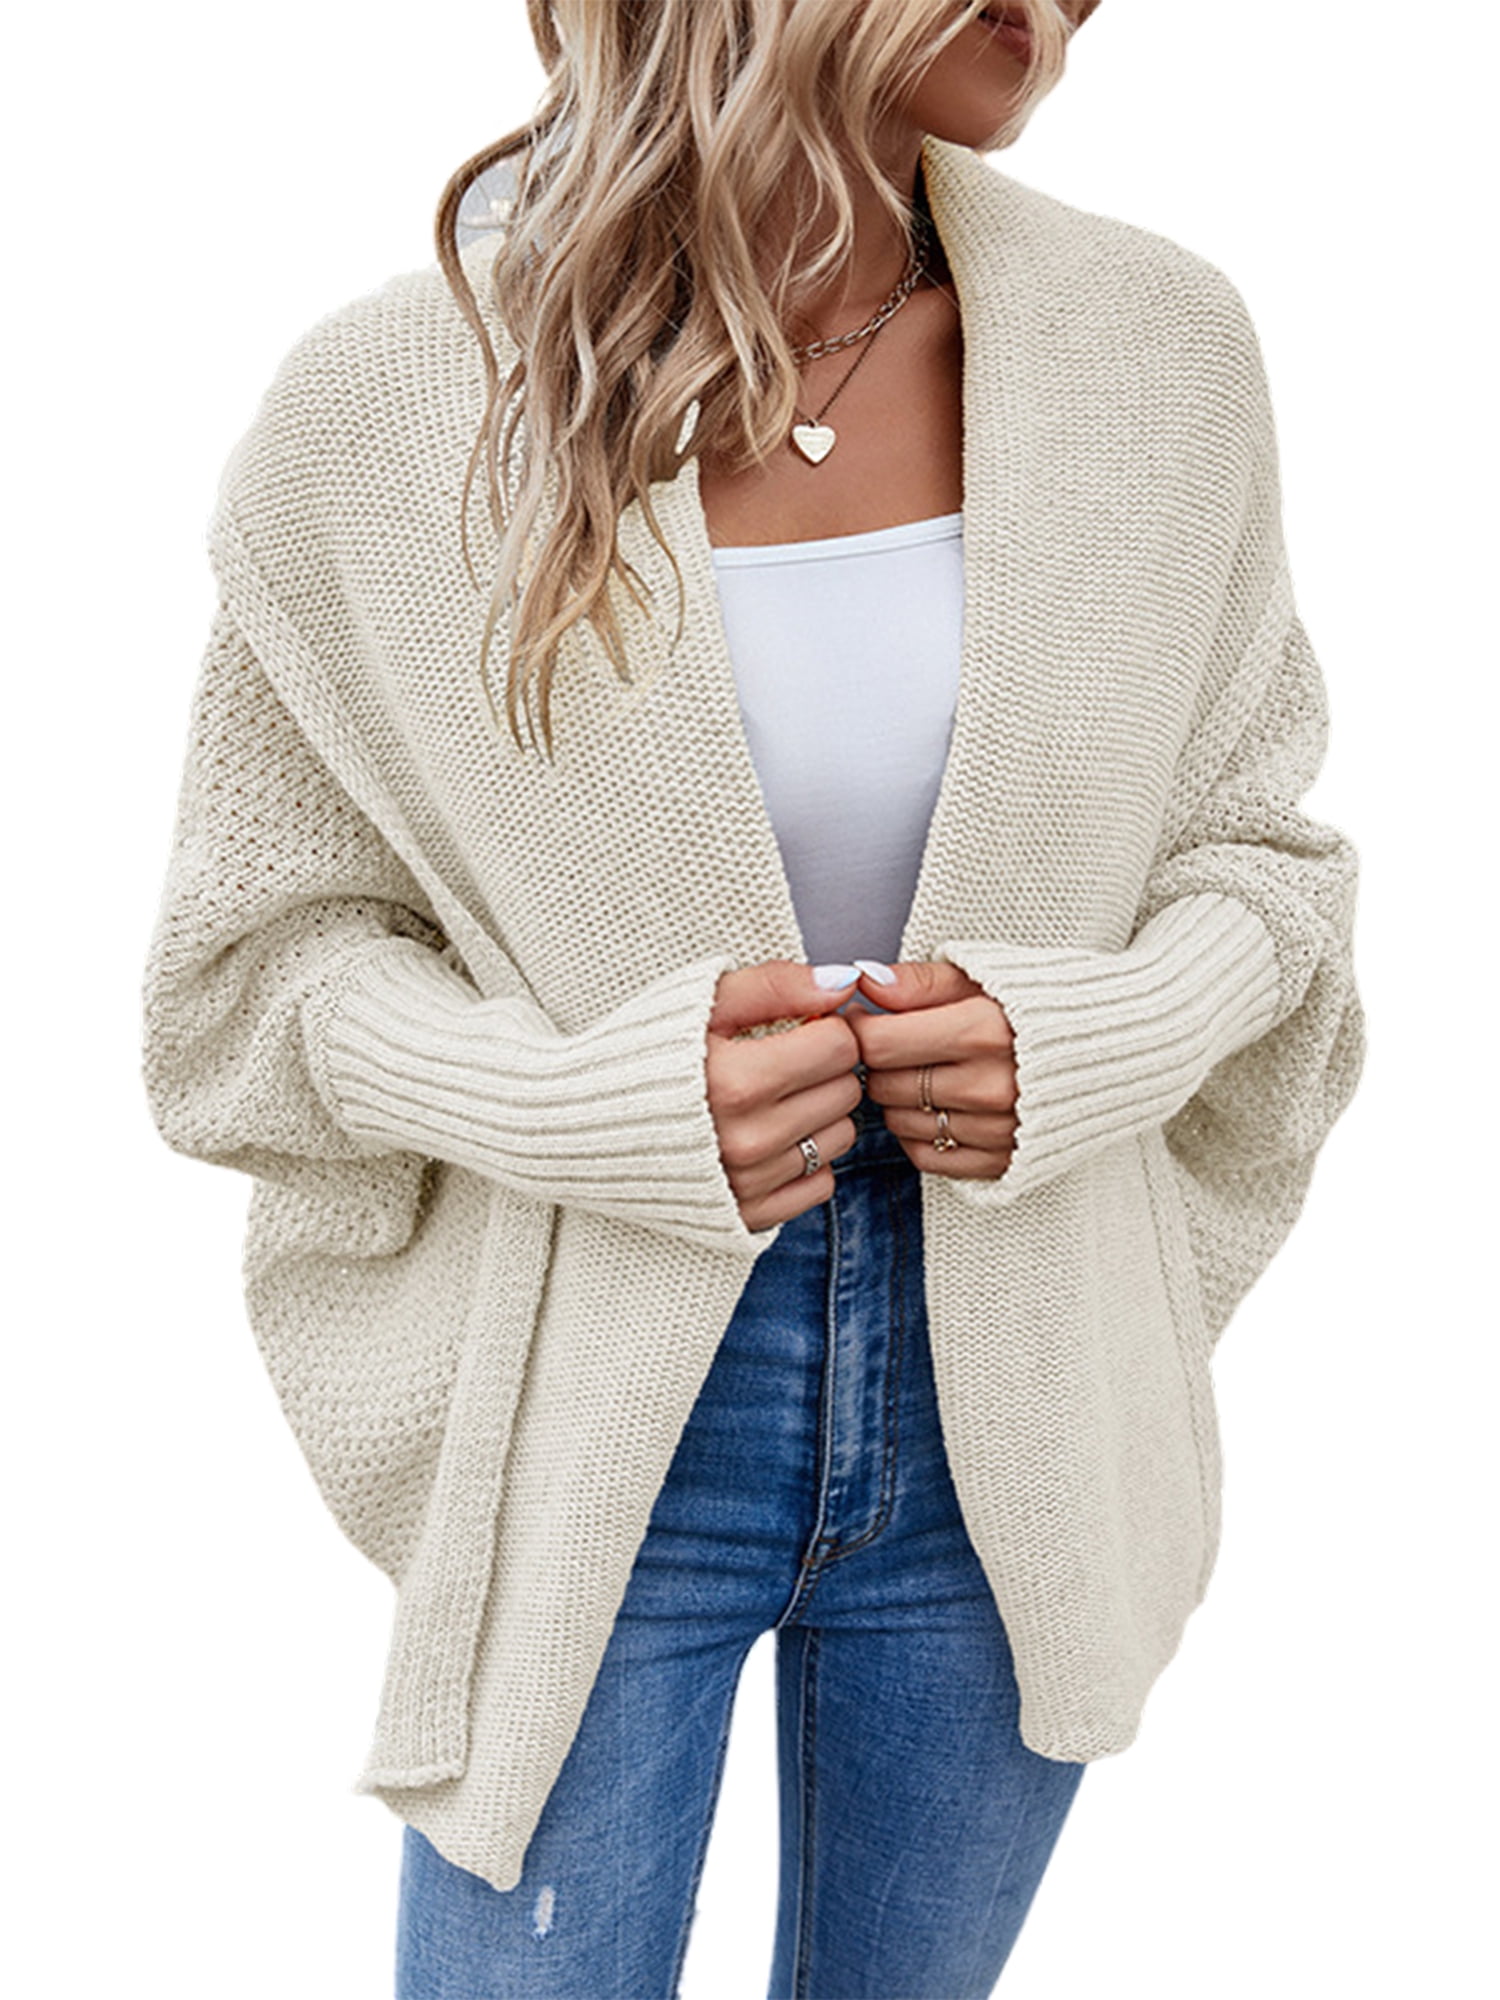 Frontwalk Womens Cardigan Sweater Kimono Batwing Cable Knitted Wrap ...